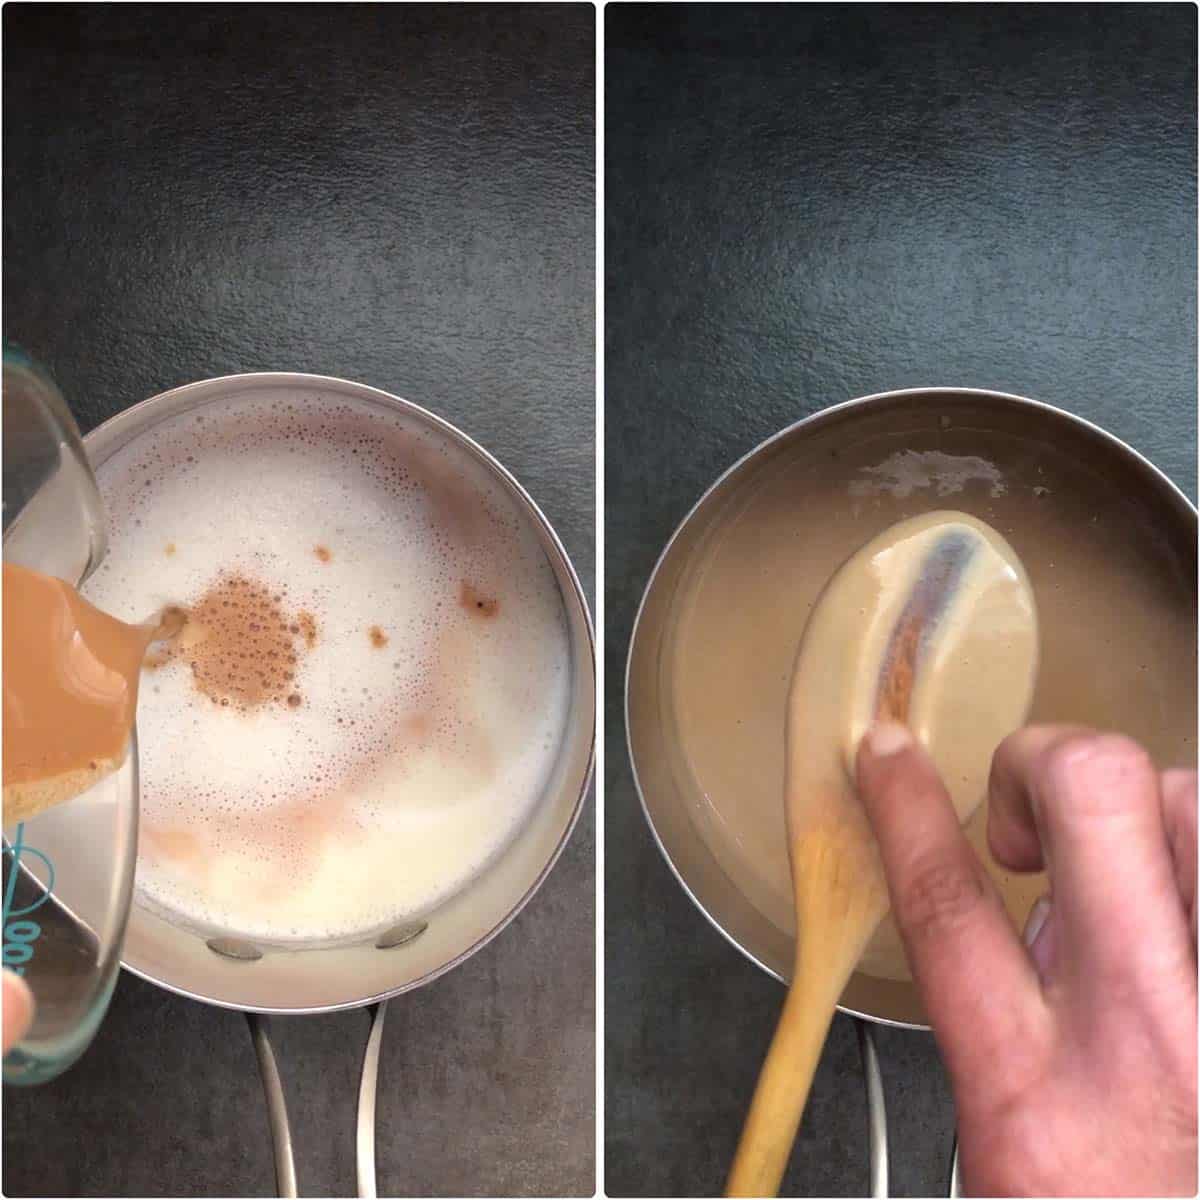 2 panel photo showing the custard before and after cooking.